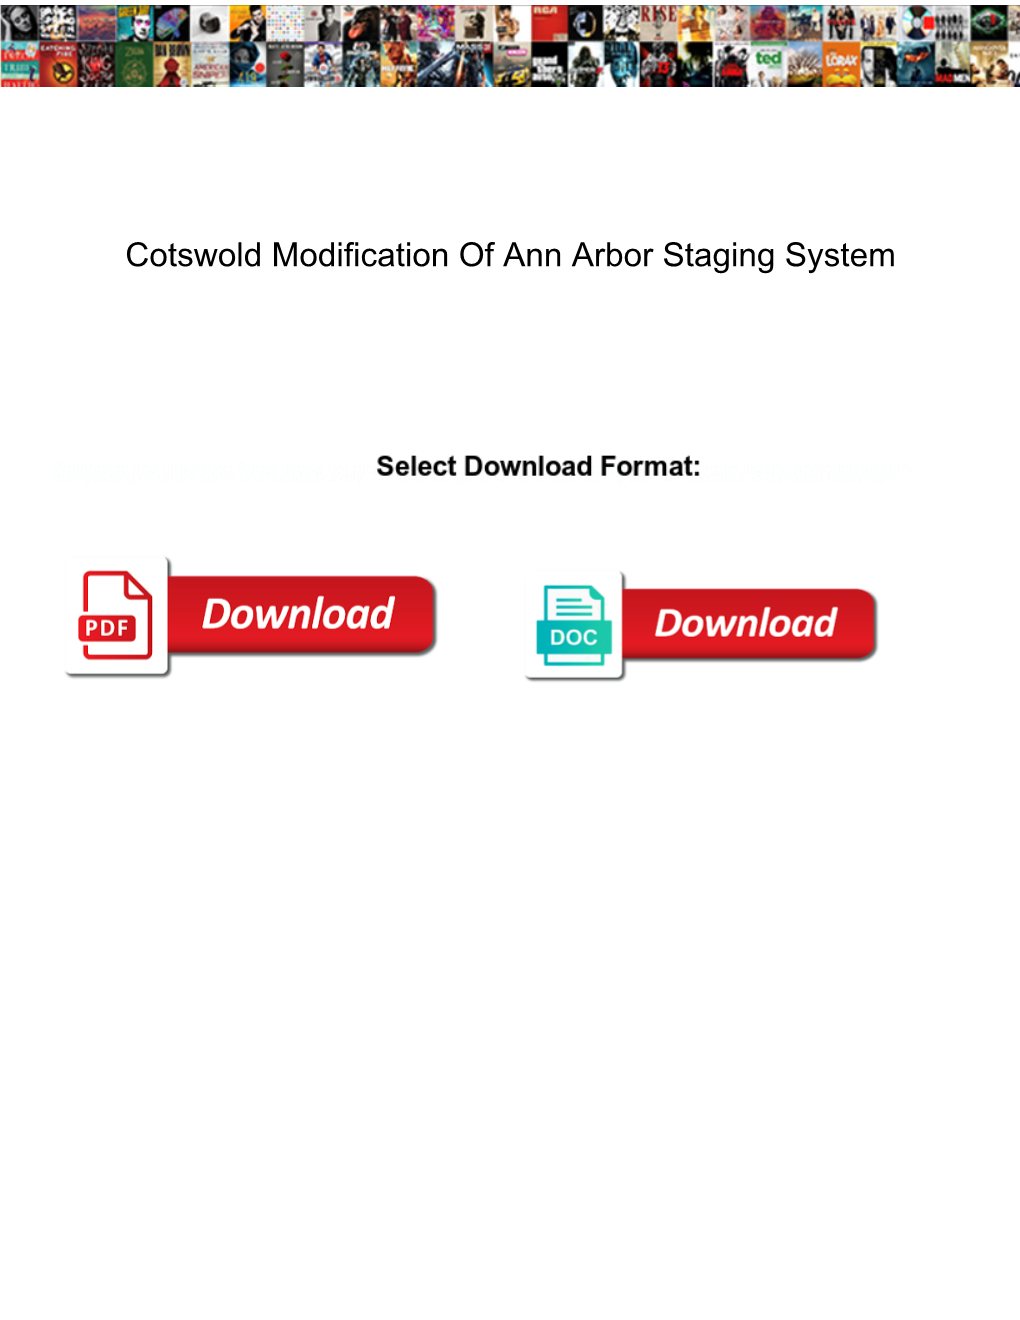 Cotswold Modification of Ann Arbor Staging System